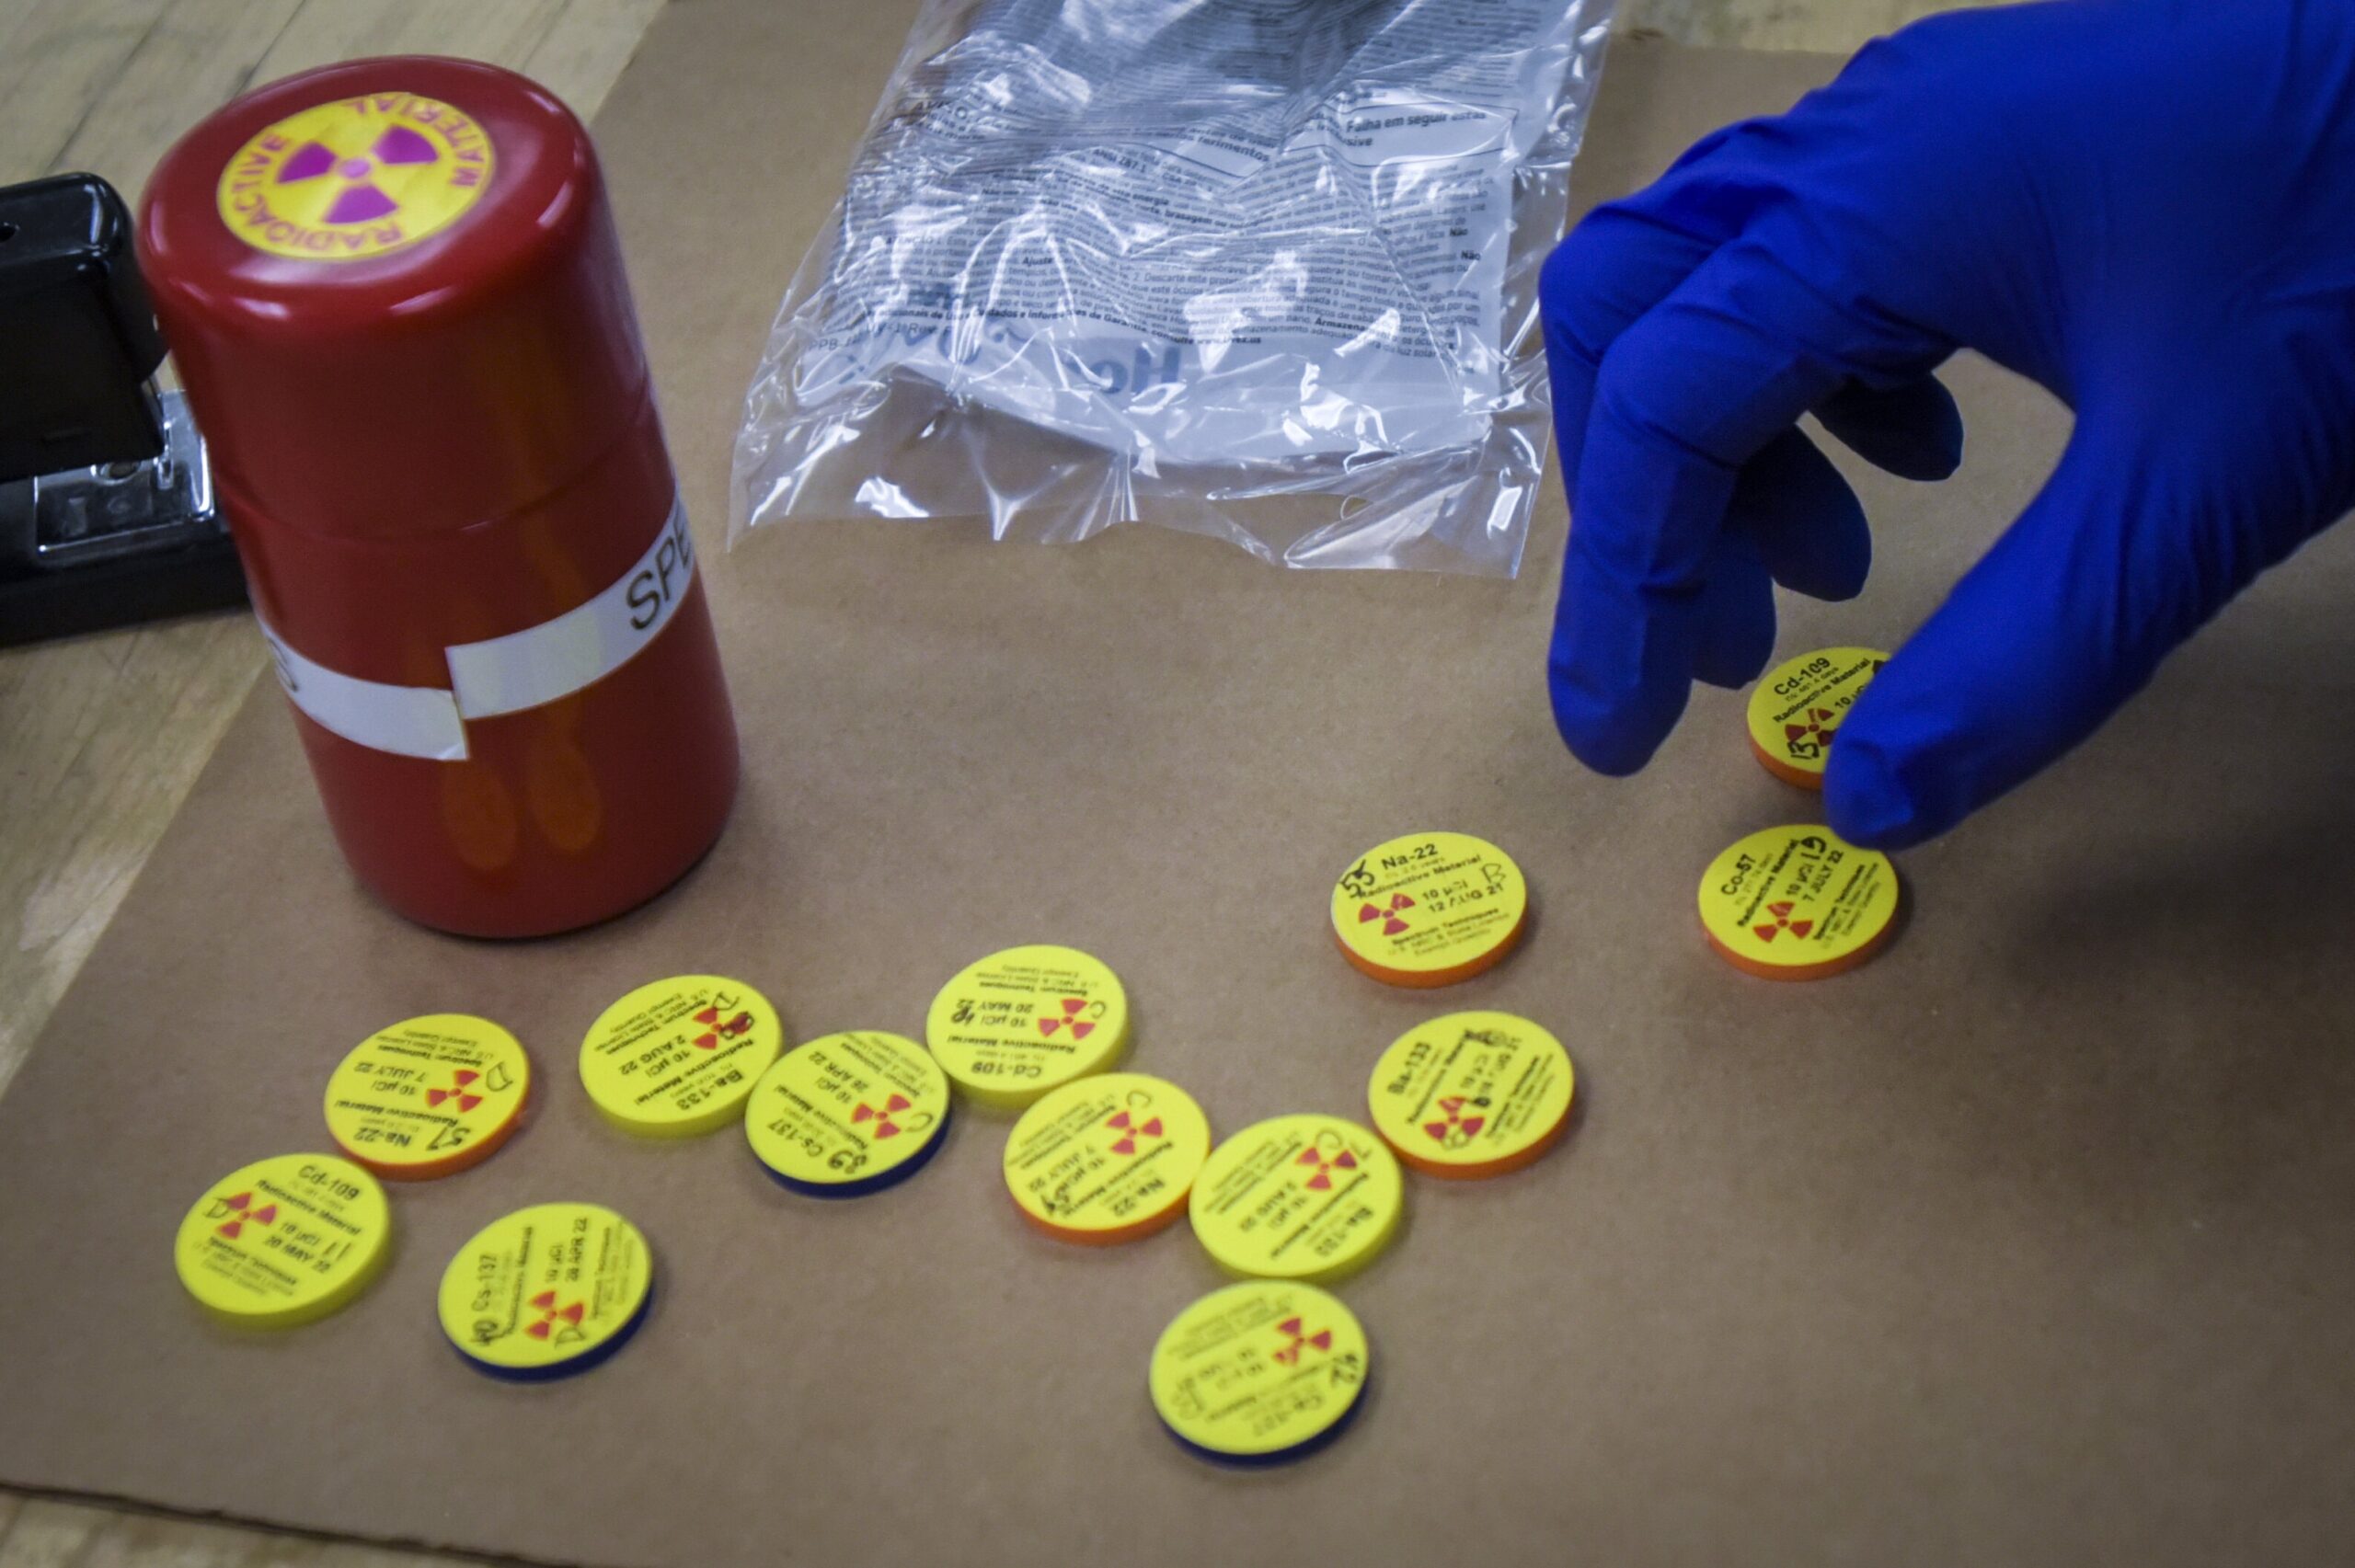 Gloved hand examining small disks with radioactive labels